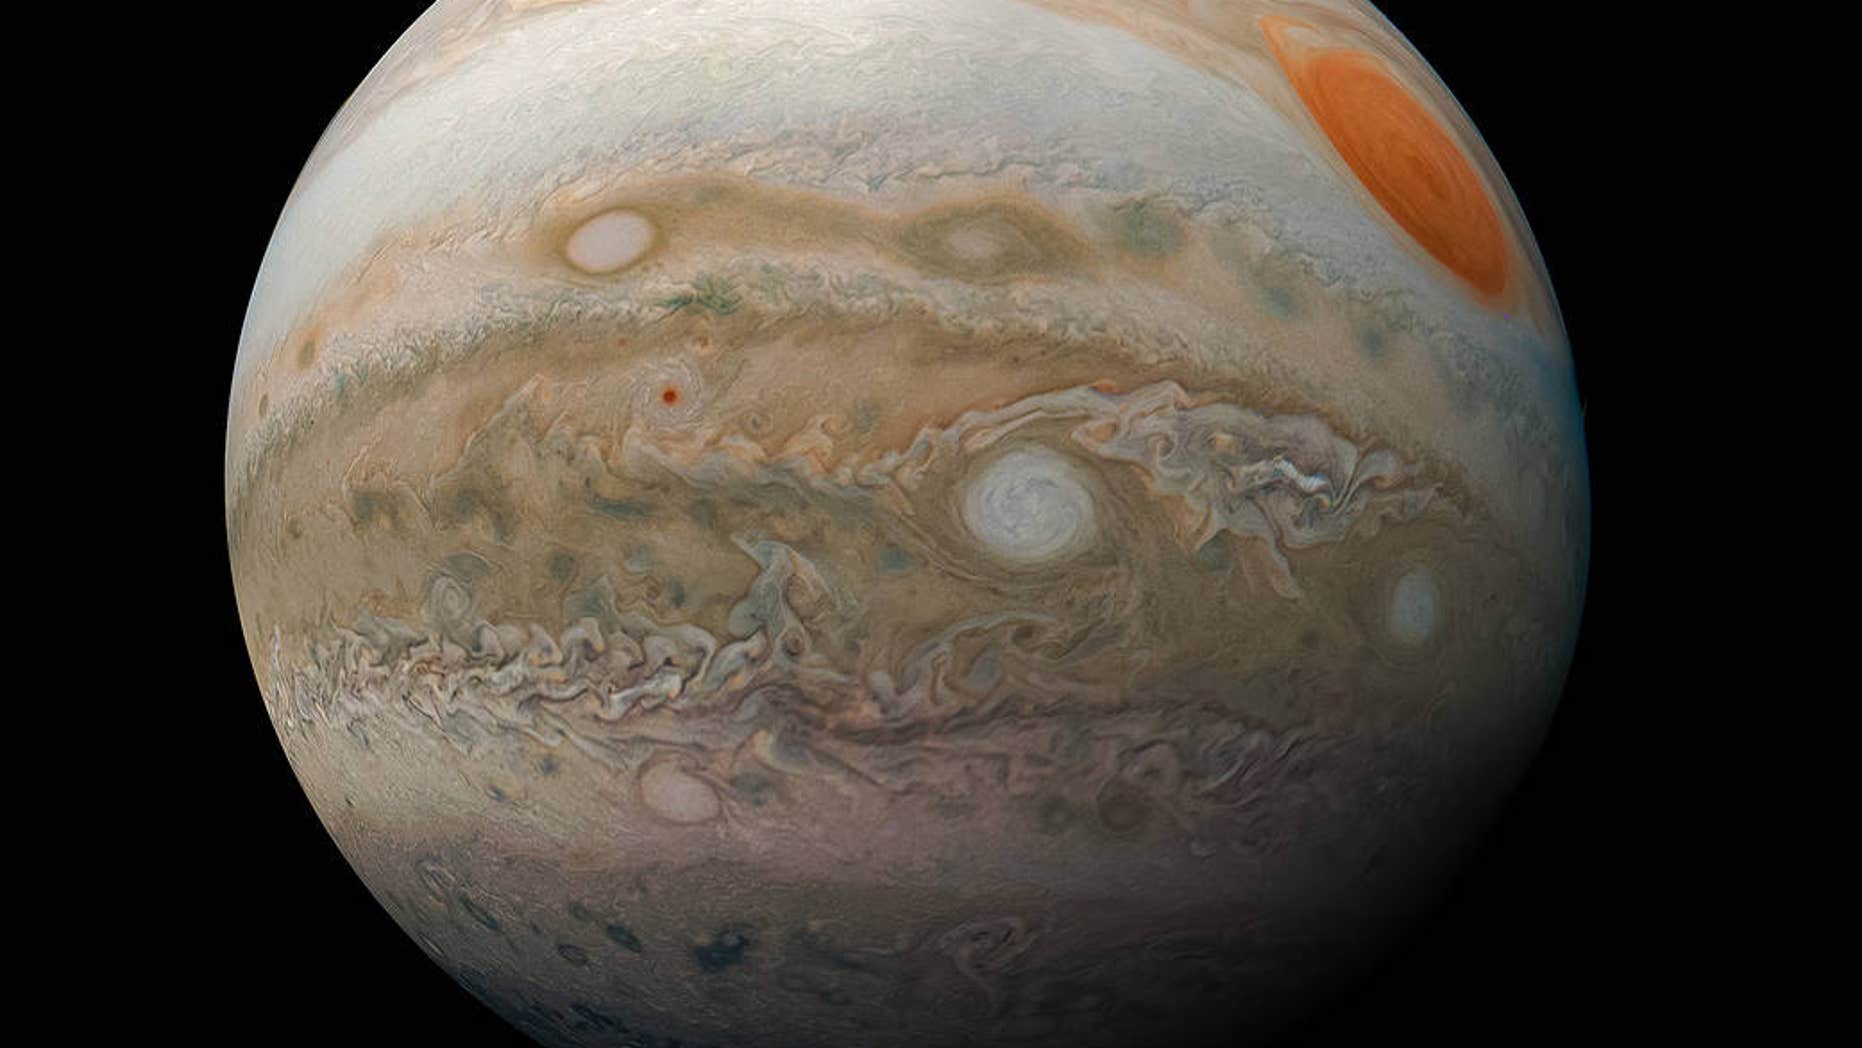 The image shows Jupiter's Great Red Spot and storms in the gas giant's southern hemisphere. (NASA/JPL-Caltech/SwRI/MSSS/Kevin M. Gill)